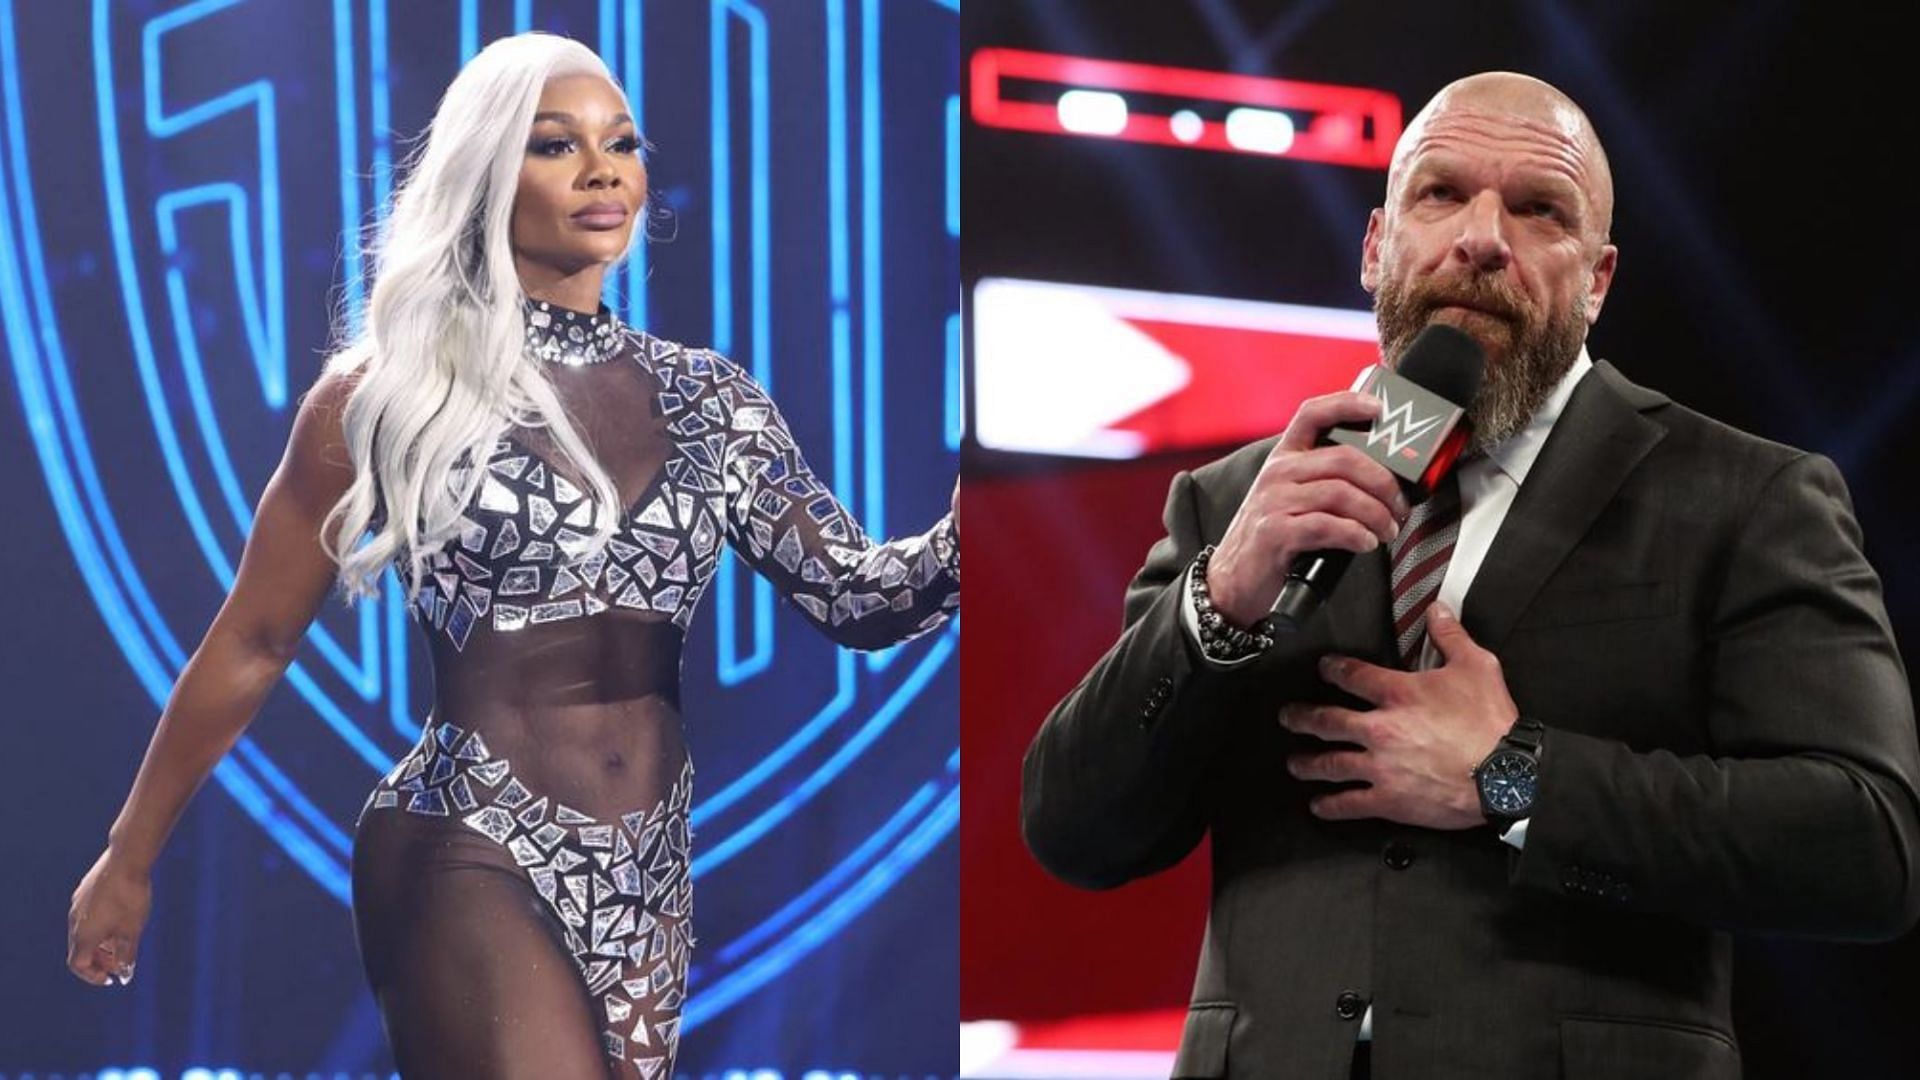 Triple H is the Chief Content Officer of WWE andJade Cargill is WWE